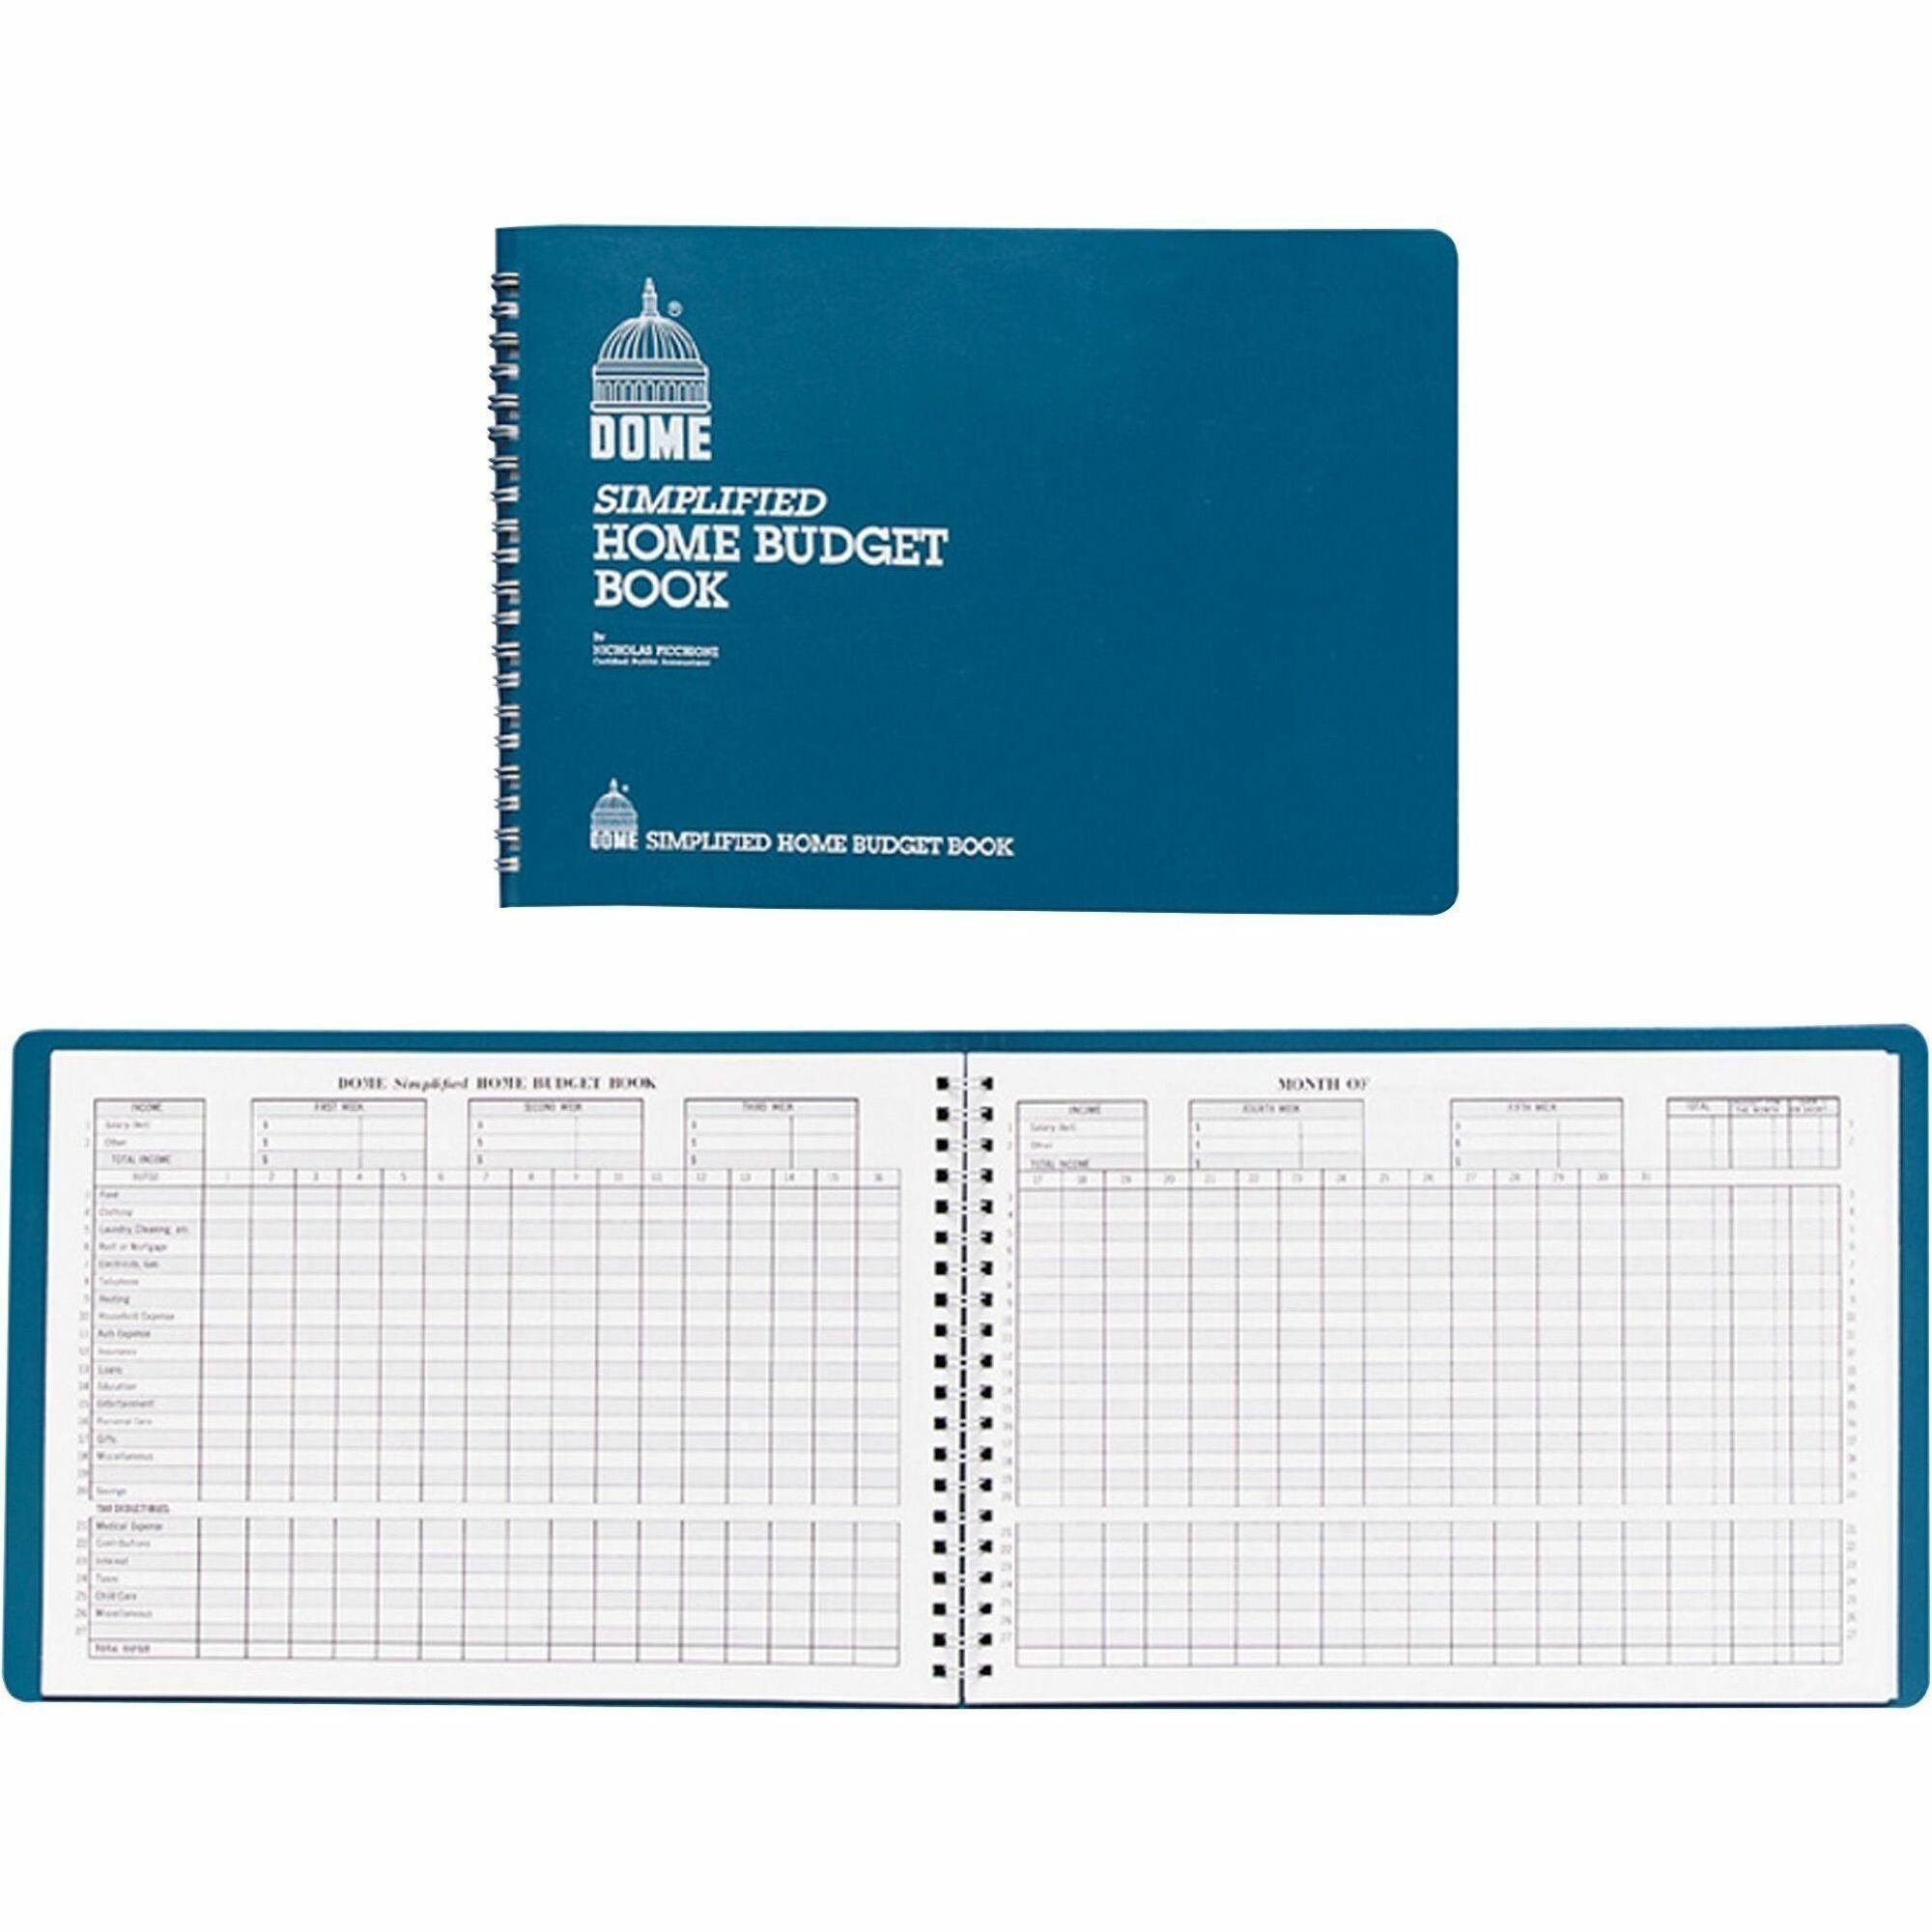 Dome Simplified Home Budget Book - 64 Sheet(s) - Wire Bound - 10.50" x 7.50" Sheet Size - White - White Sheet(s) - Blue Cover - Recycled - 1 Each - 